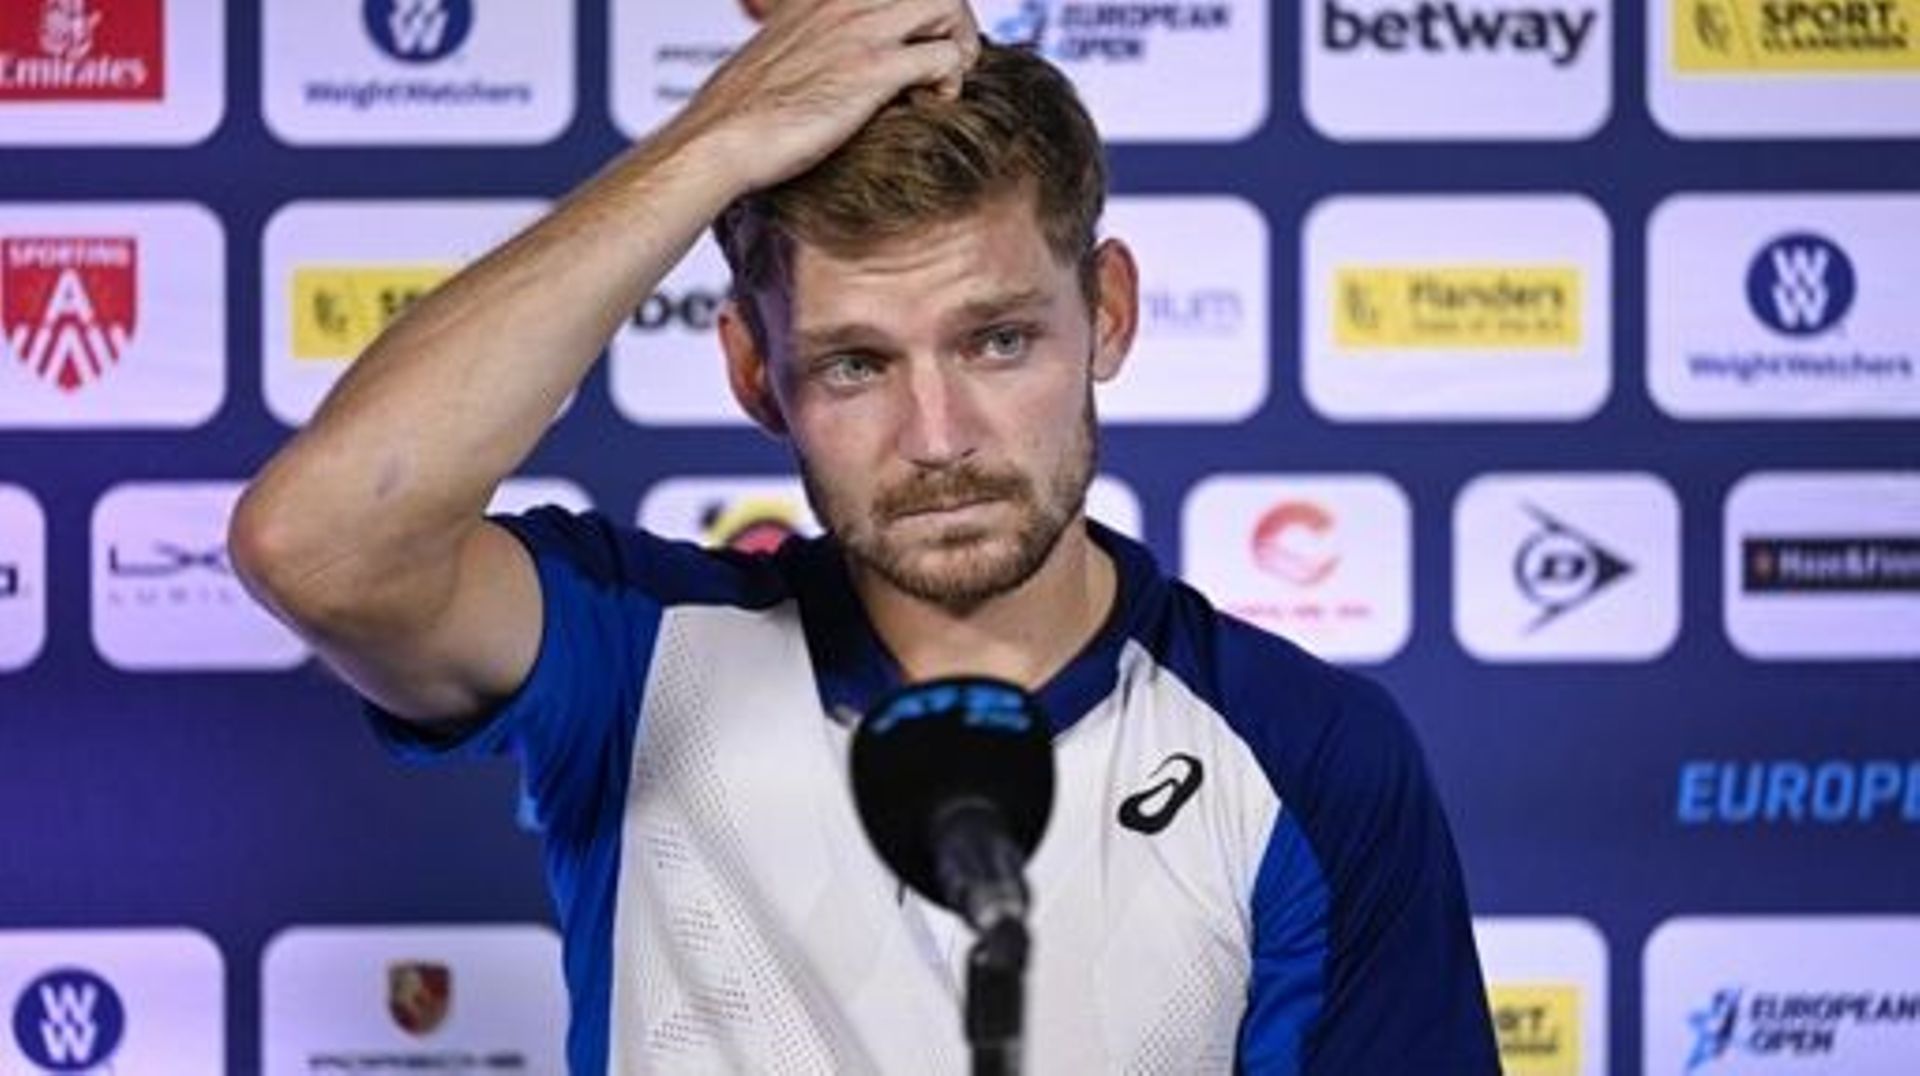 Belgian David Goffin pictured during a press conference after the men's singles first round game between Belgian Bailly and Belgian Goffin at the European Open Tennis ATP tournament, in Antwerp, Tuesday 18 October 2022. BELGA PHOTO LAURIE DIEFFEMBACQ